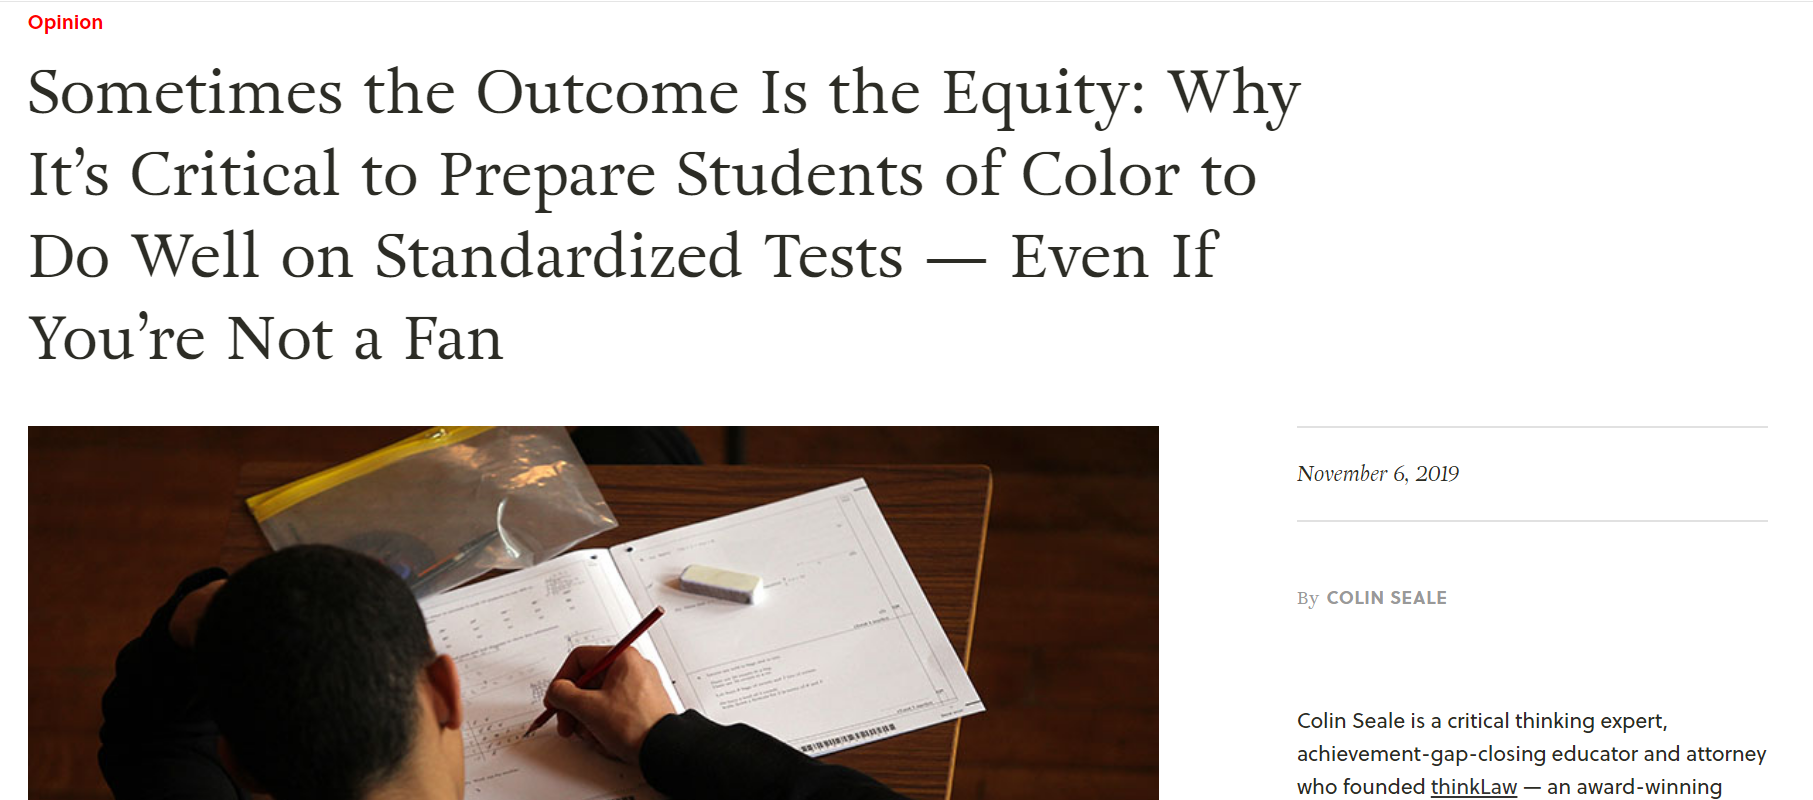 The Outcome is The Equity